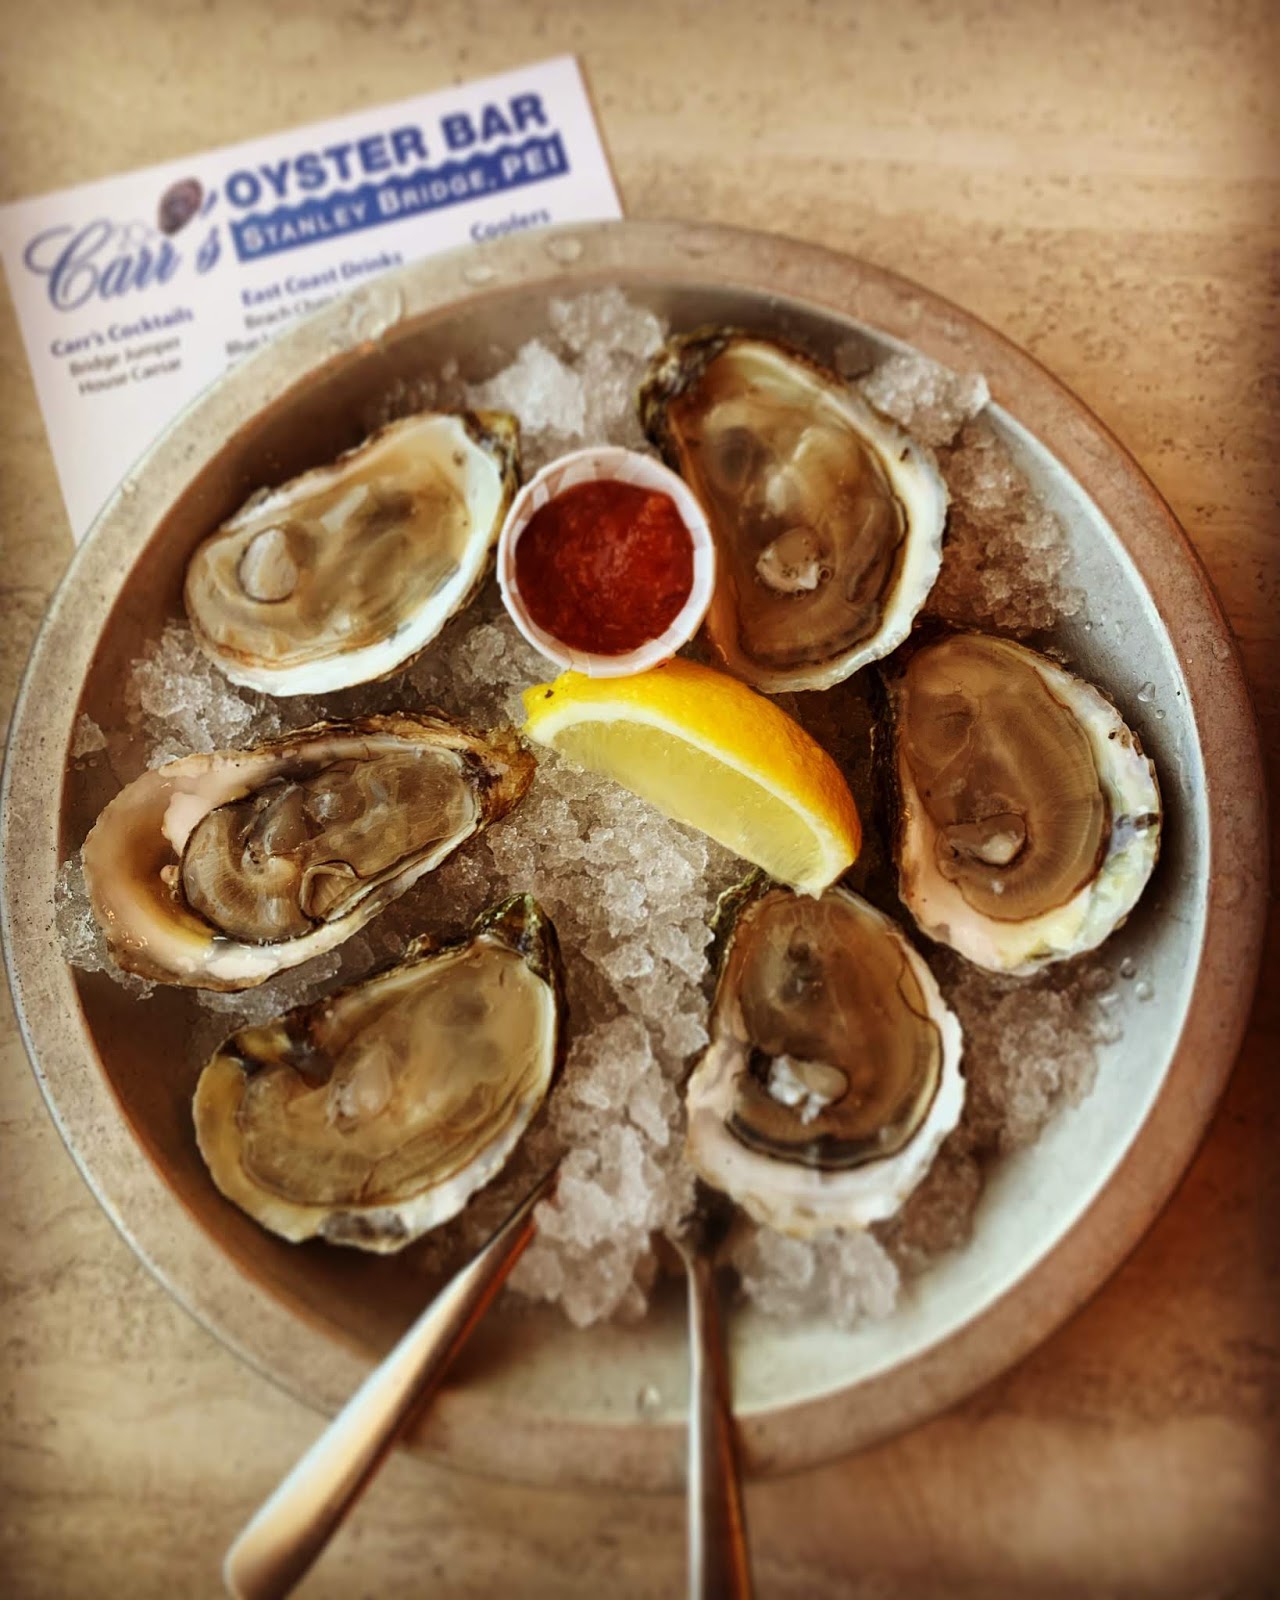 In search of PEI & Nova Scotia's Oysters | Southold Bay Oysters Blog